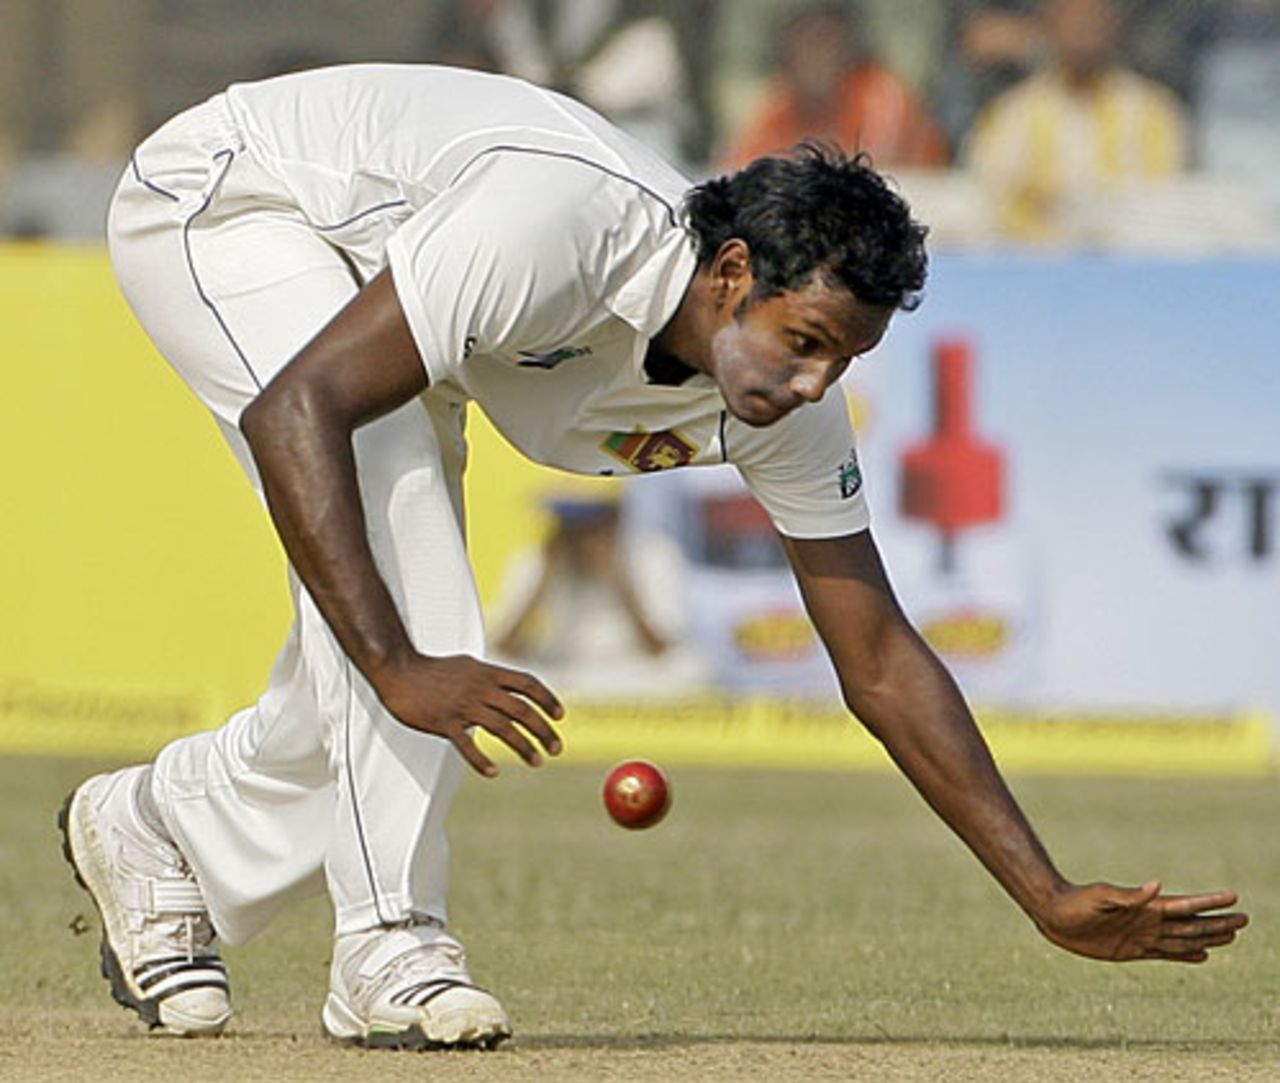 Angelo Mathews is unable to stop a lashing straight drive, India v Sri Lanka, 2nd Test, Kanpur, 1st day, November 24, 2009